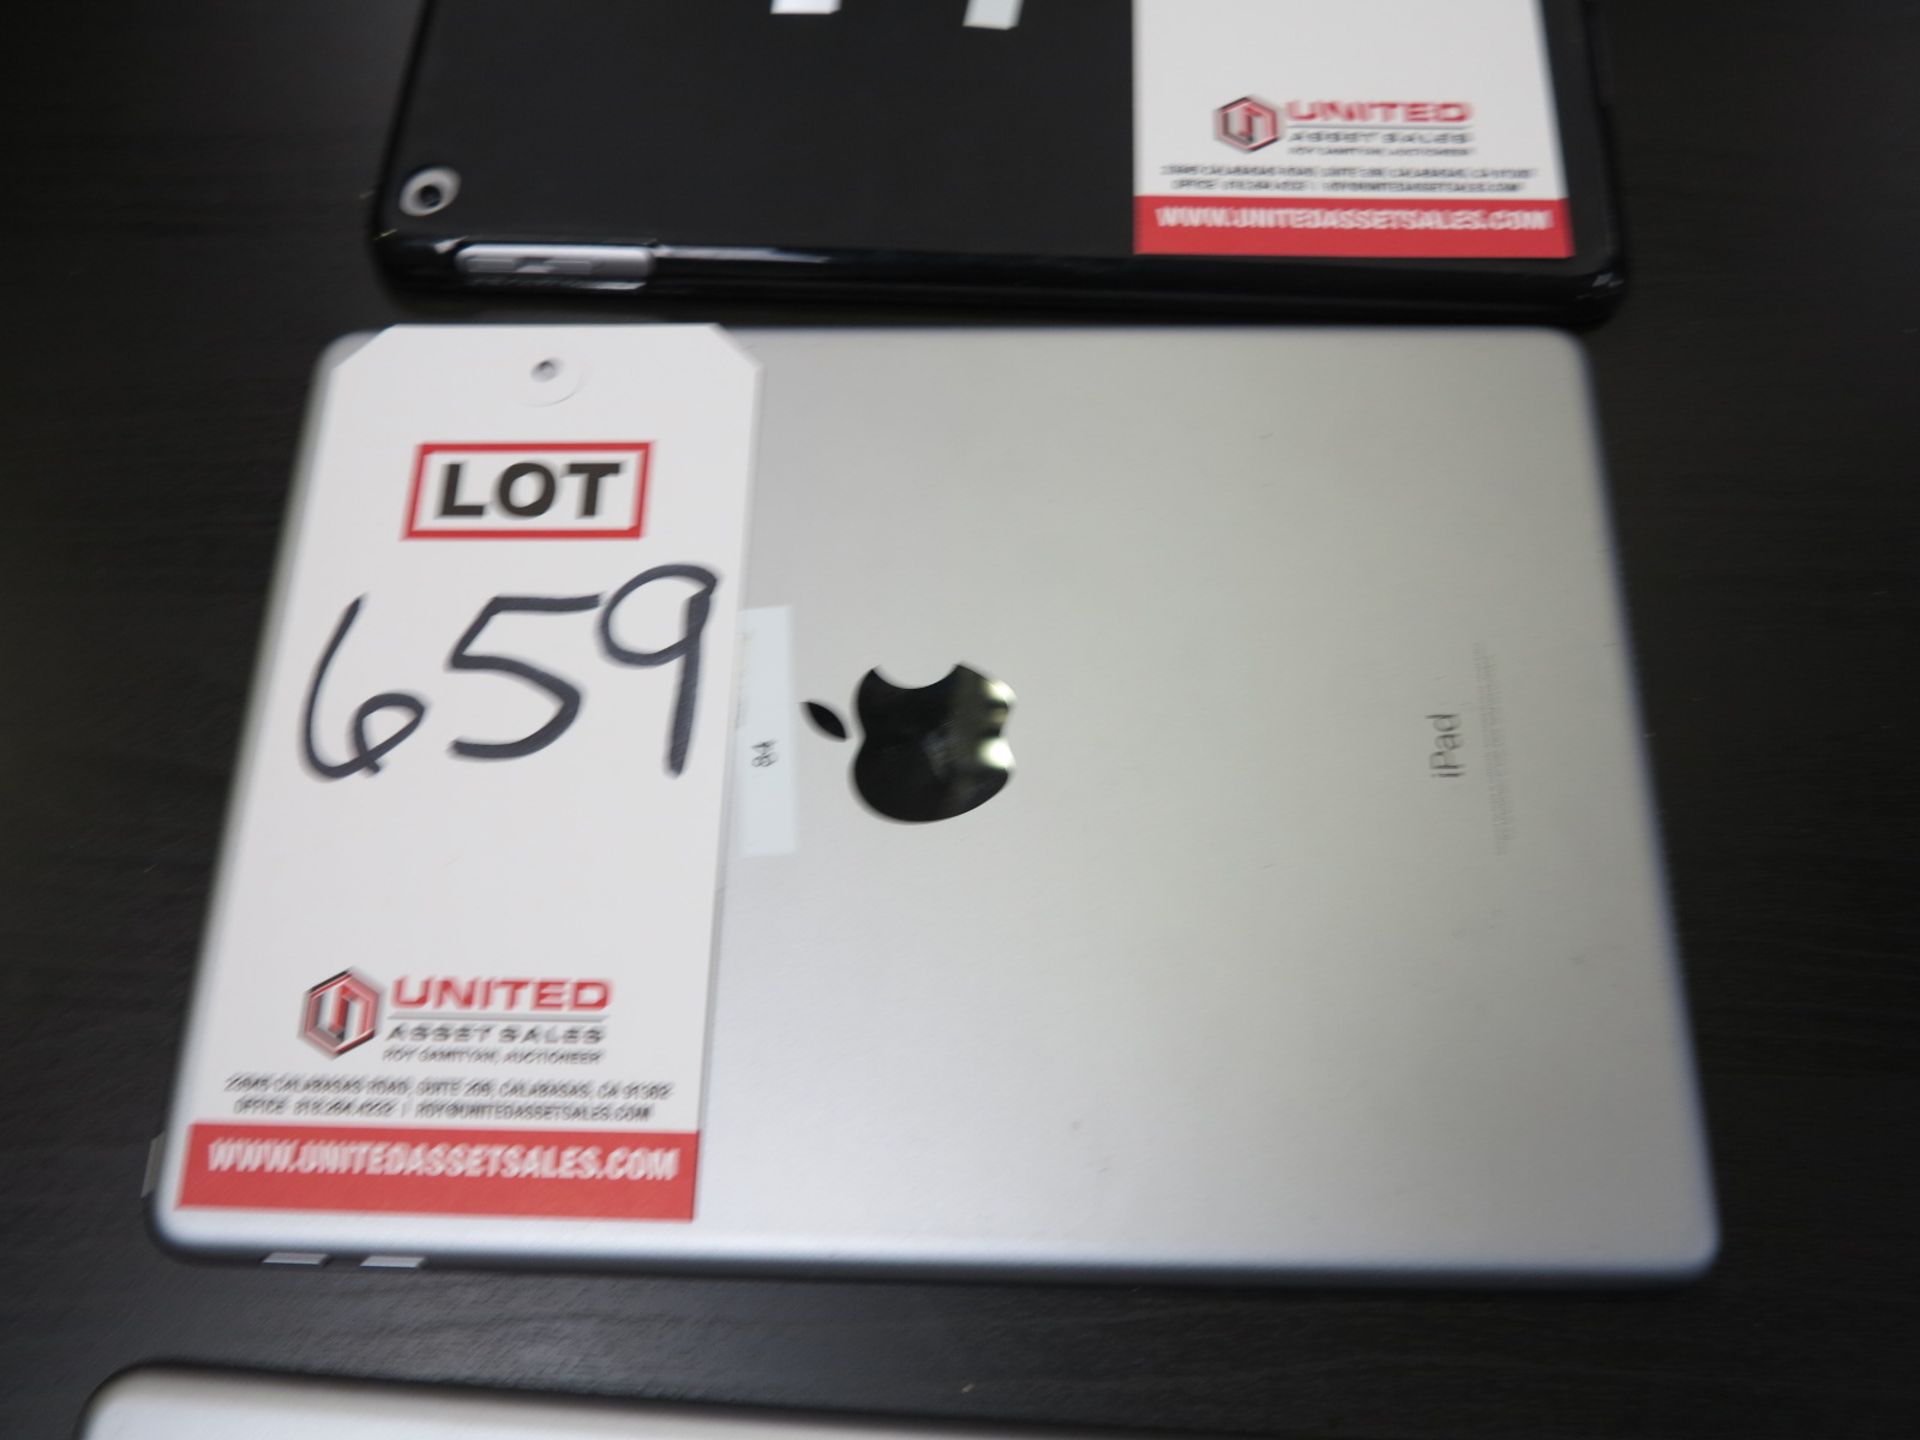 APPLE IPAD, MODEL A1822, WITHOUT POWER PACK